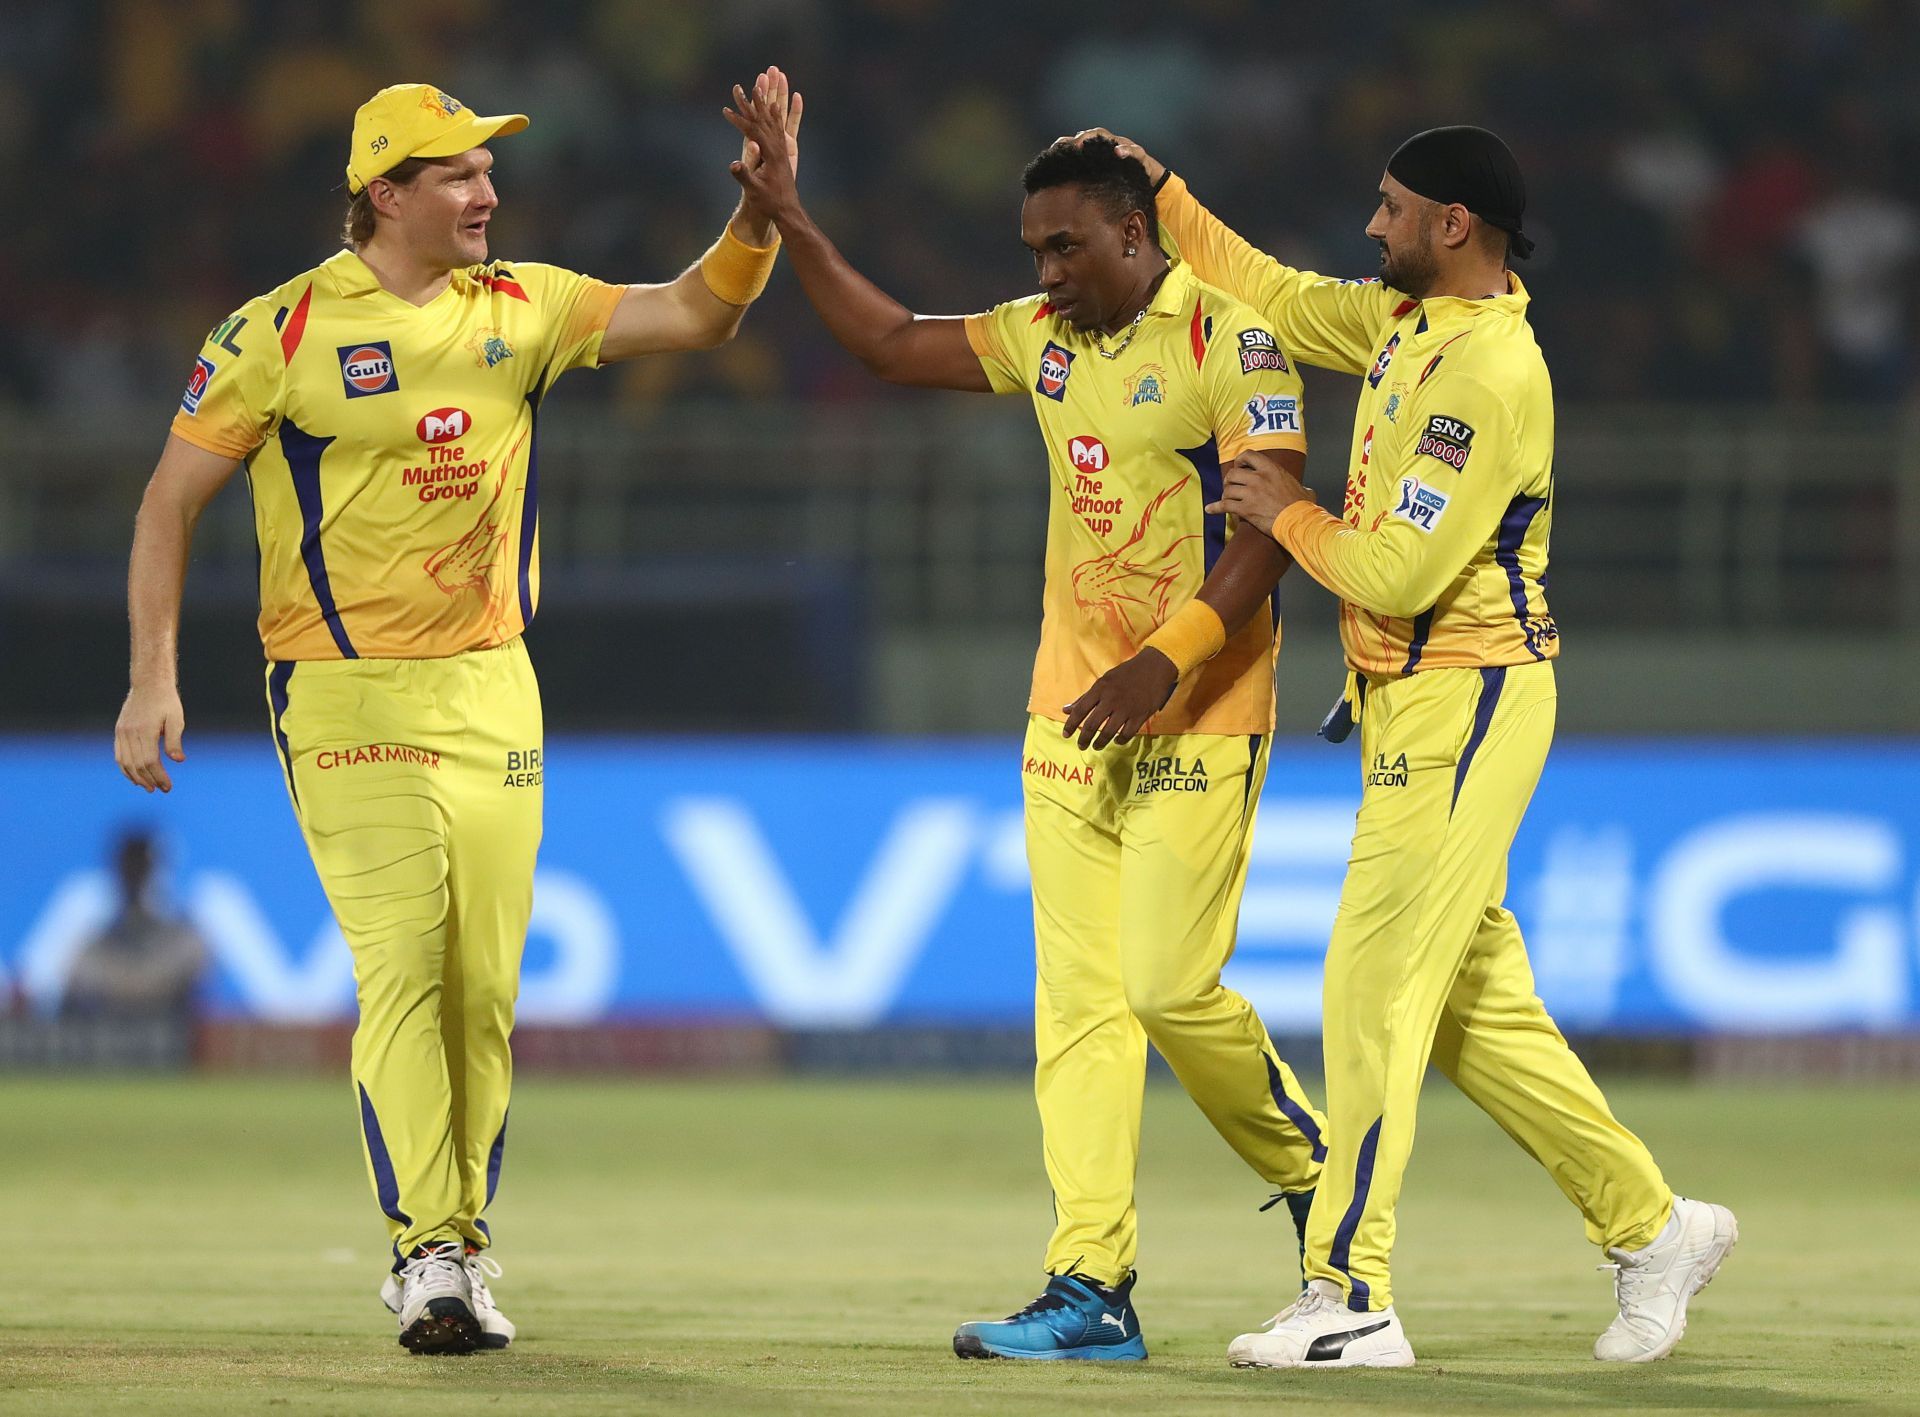 Dwayne Bravo made his debut for CSK in 2011